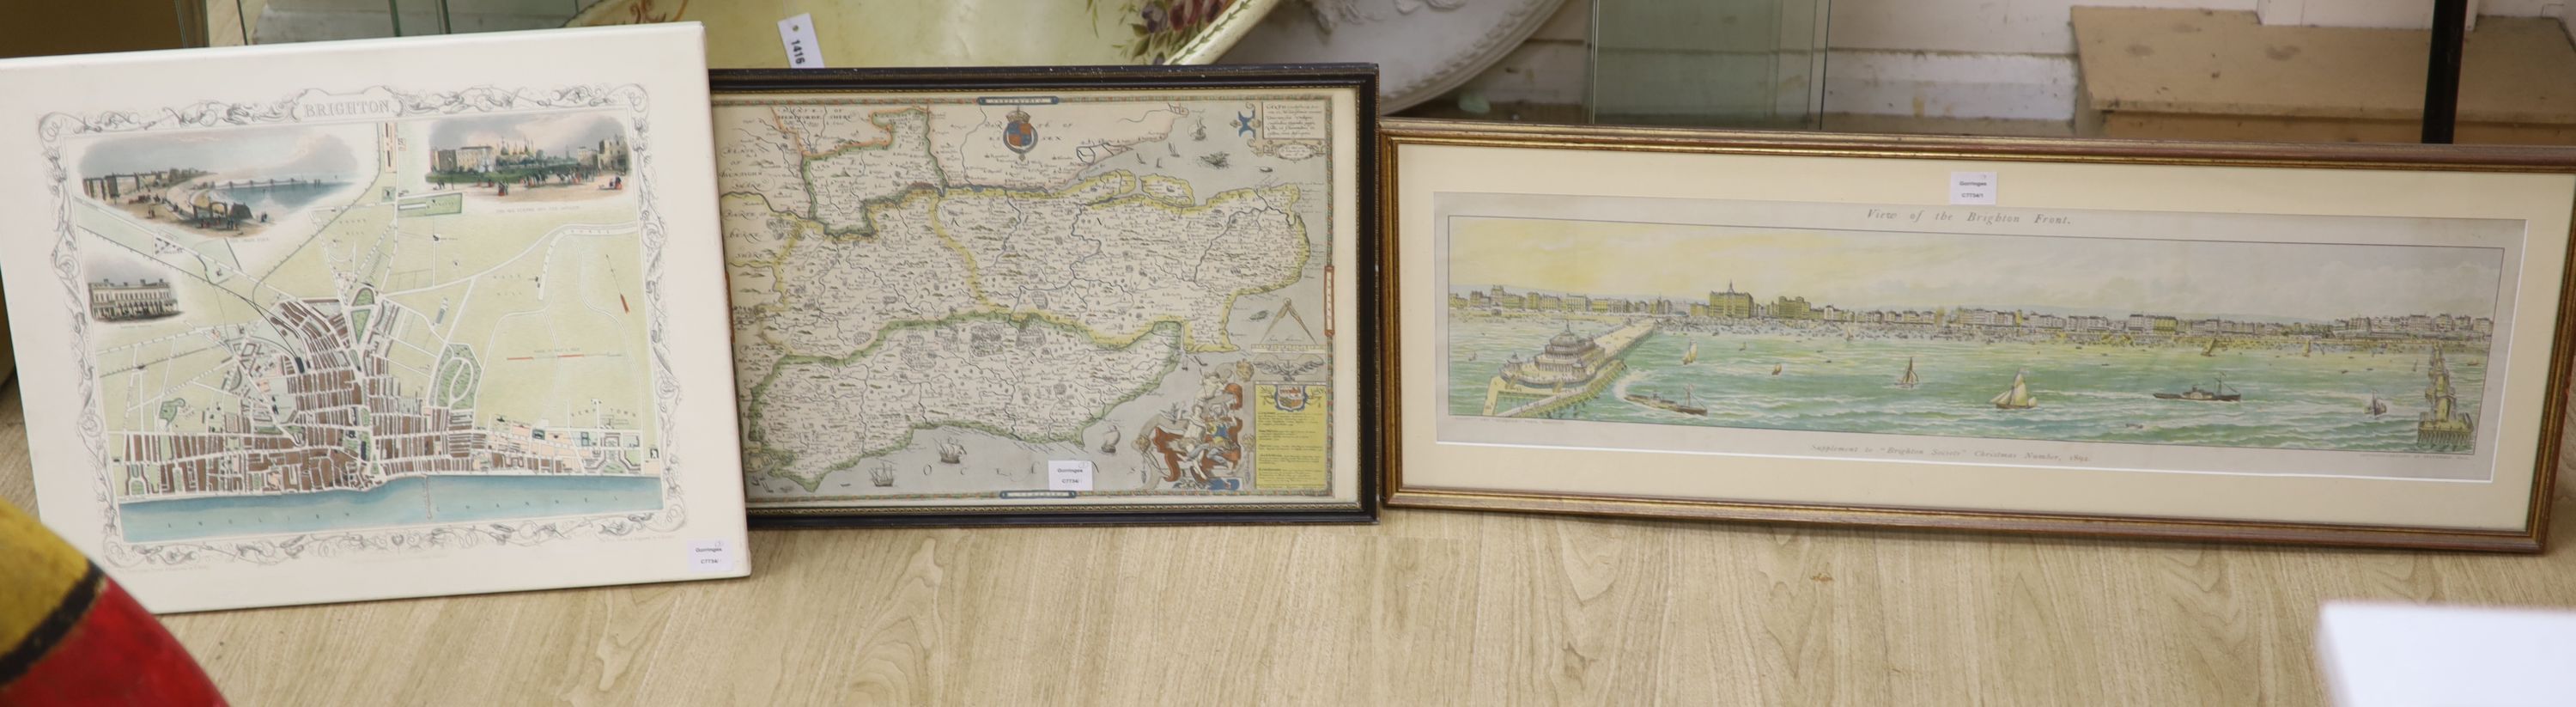 Brighton Society 1892, chromolithograph, View of the Brighton Front, 25 x 95cm, a reprint map of Sussex and a reprint map of Brighton